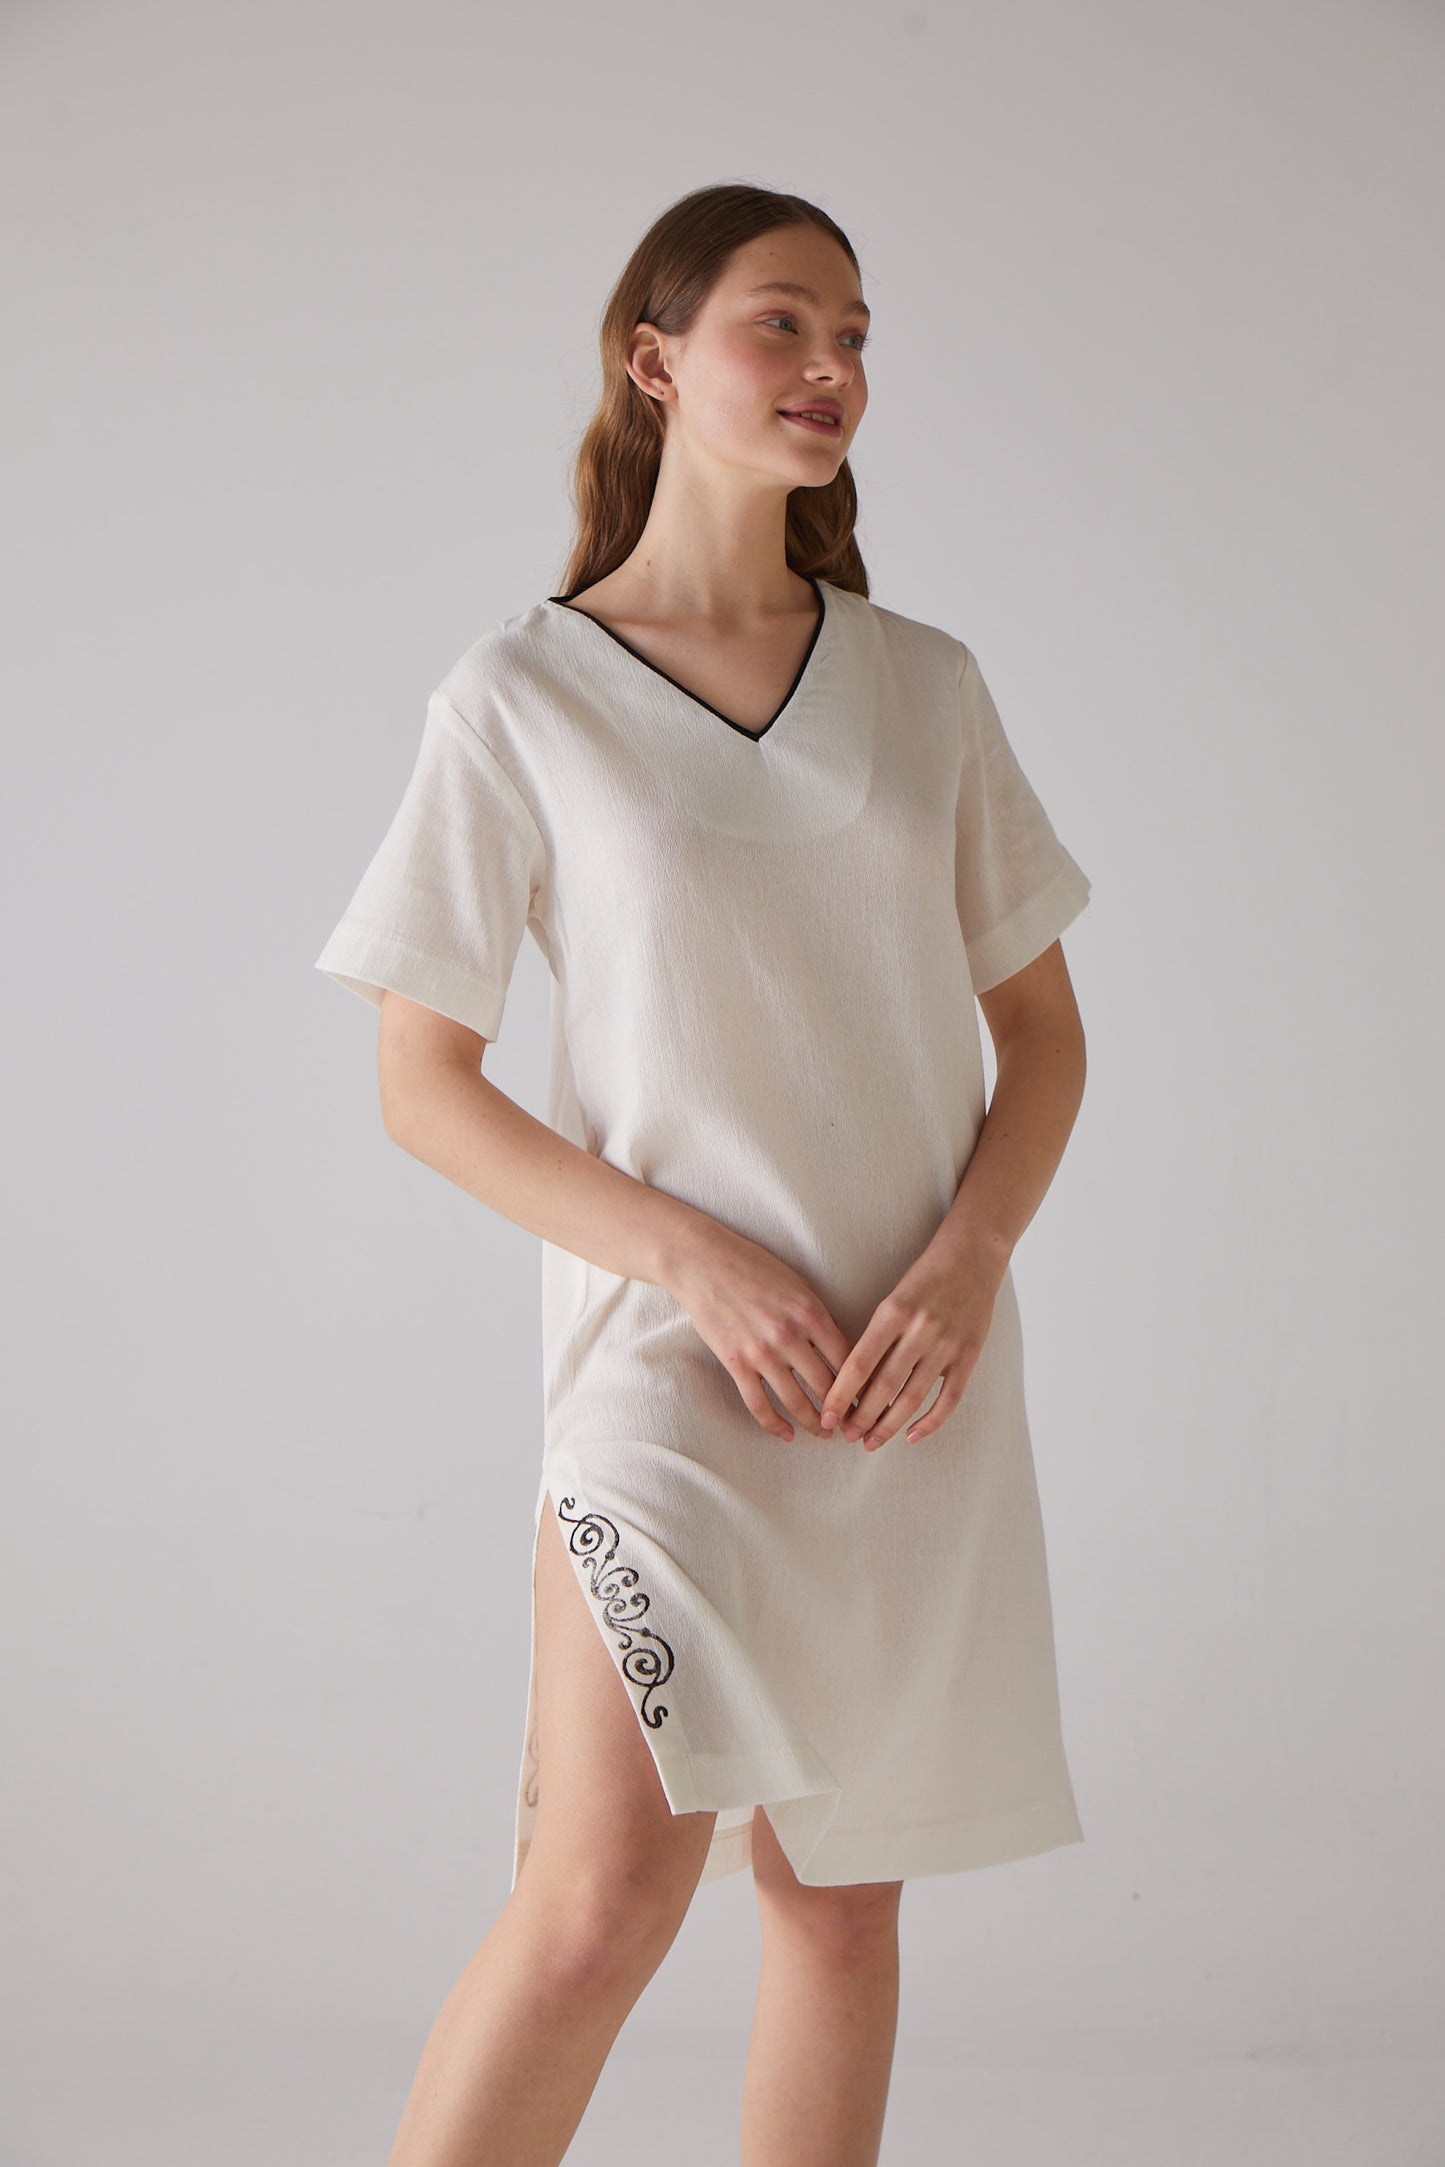 Clef woodcut patterned V-neck nightgown in white 100% organic cotton